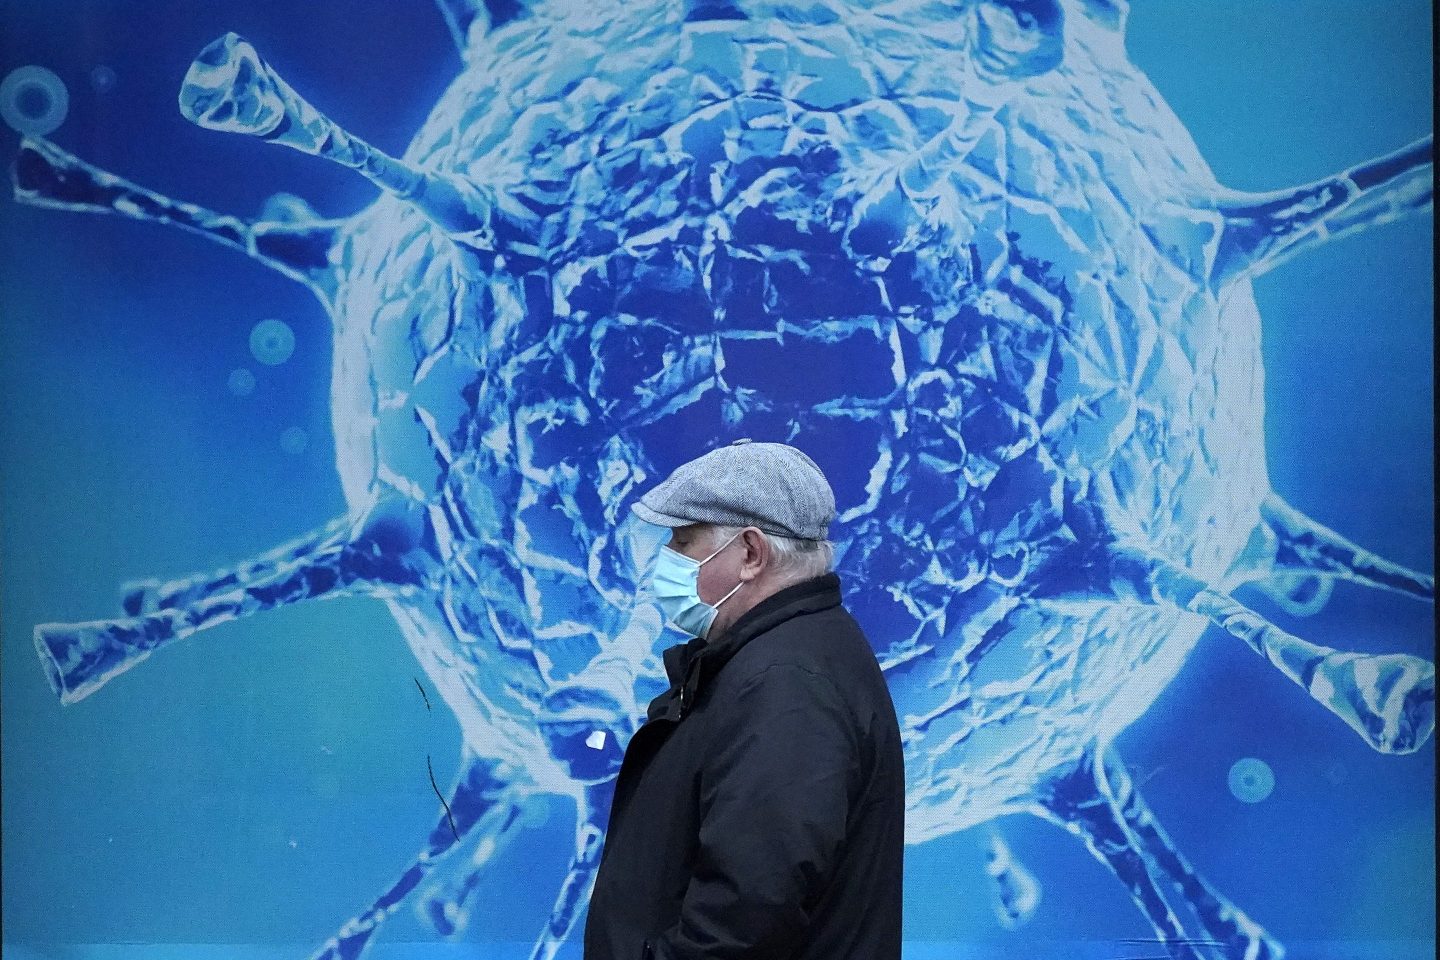 OLDHAM, UNITED KINGDOM &#8211; NOVEMBER 24: A man wearing a protective face mask walks past an illustration of a virus outside Oldham Regional Science Centre on November 24, 2020 in Oldham, United Kingdom. England is continuing its second national coronavirus lockdown. People are still permitted to exercise with one other person, takeaway food is permitted but bars and restaurants are shut for sit-in service. Schools will remain open but people are being advised to work from home where possible and only undertake necessary travel. All non-essential shops are closed with supermarkets and builders&#8217; merchants remaining open. (Photo by Christopher Furlong/Getty Images)